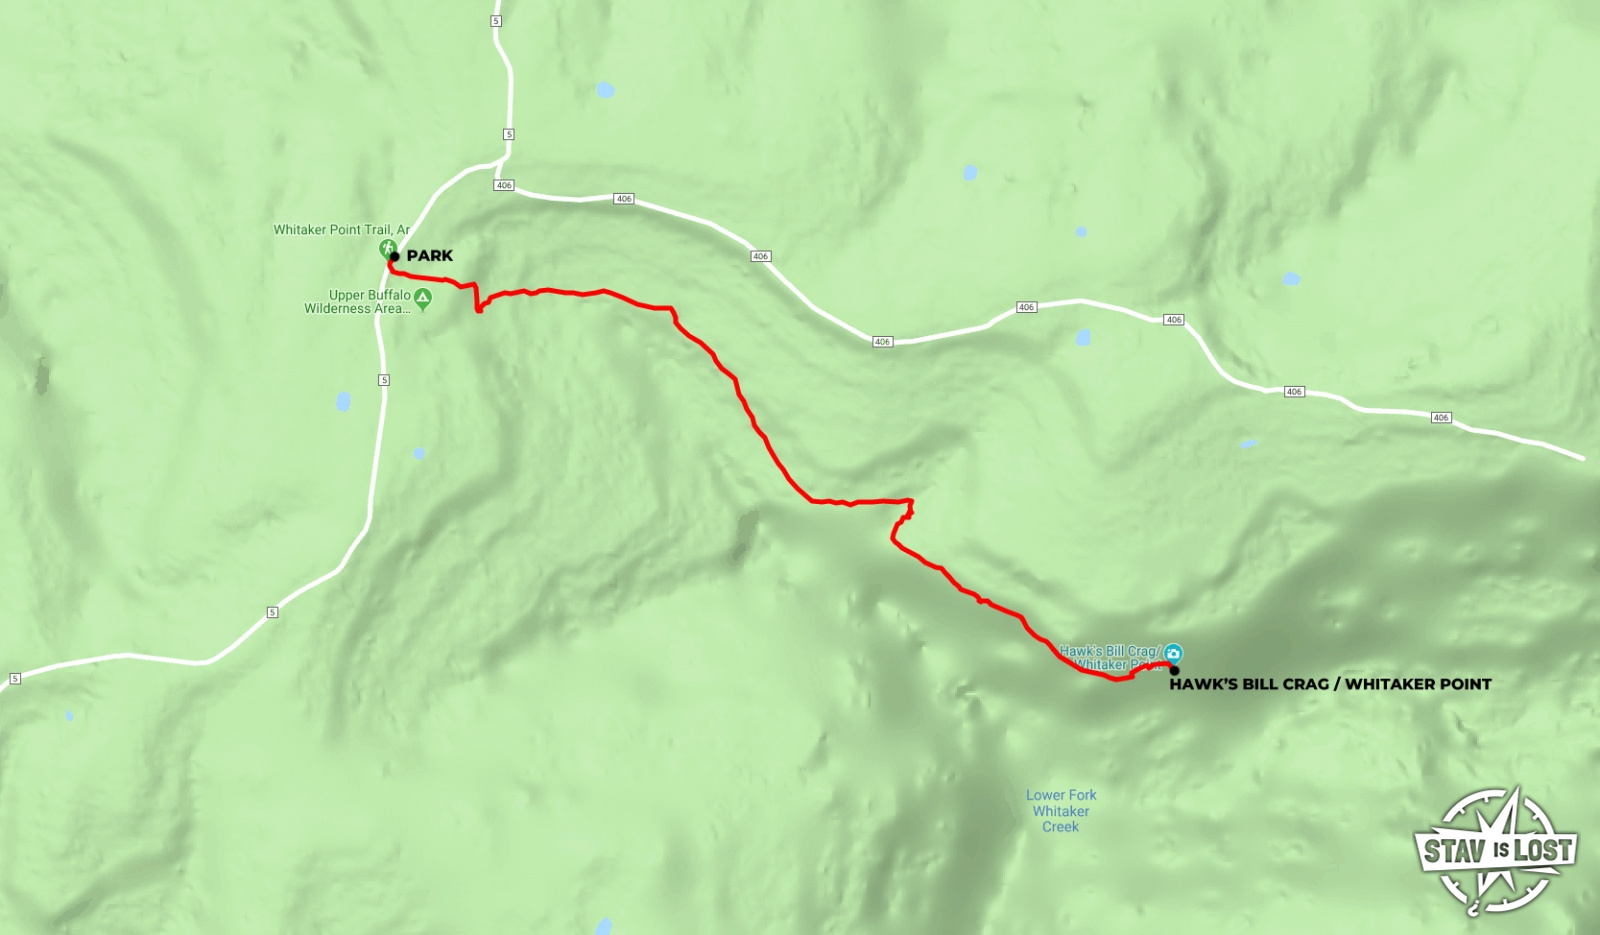 map for Hawksbill Crag (Whitaker Point) by stav is lost